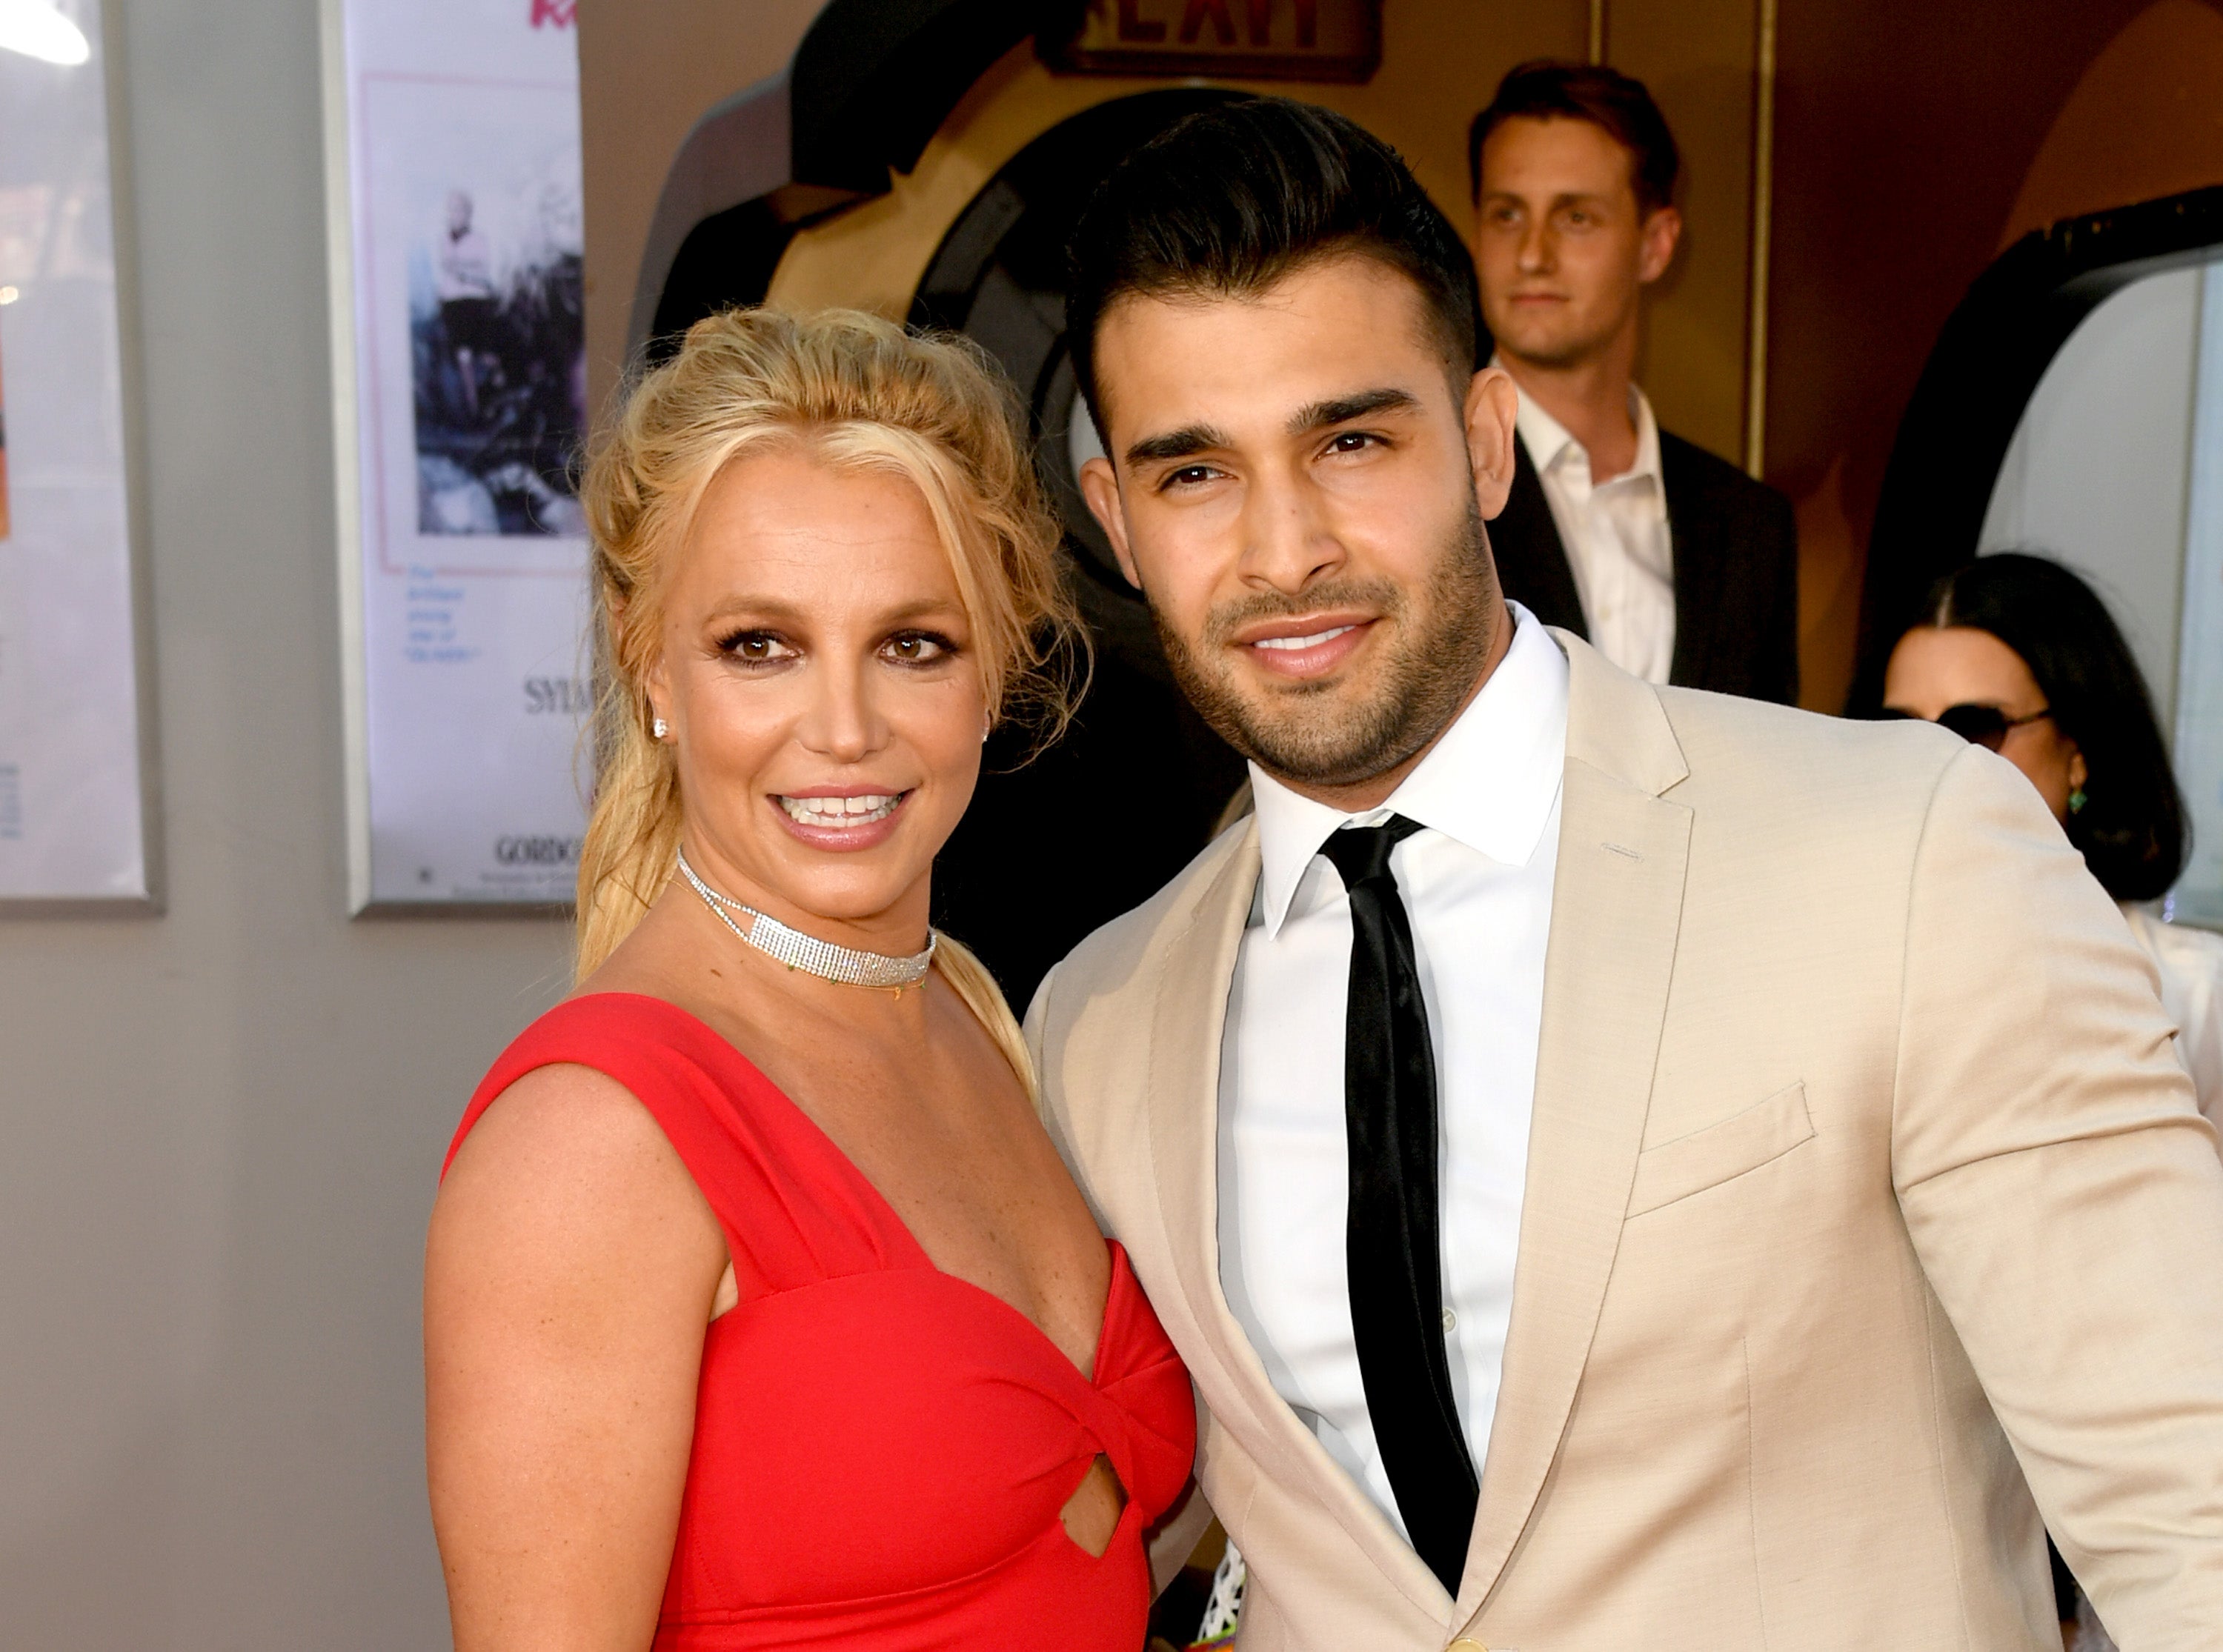 Spears married Iranian-American fitness instructor Sam Asghari in 2022